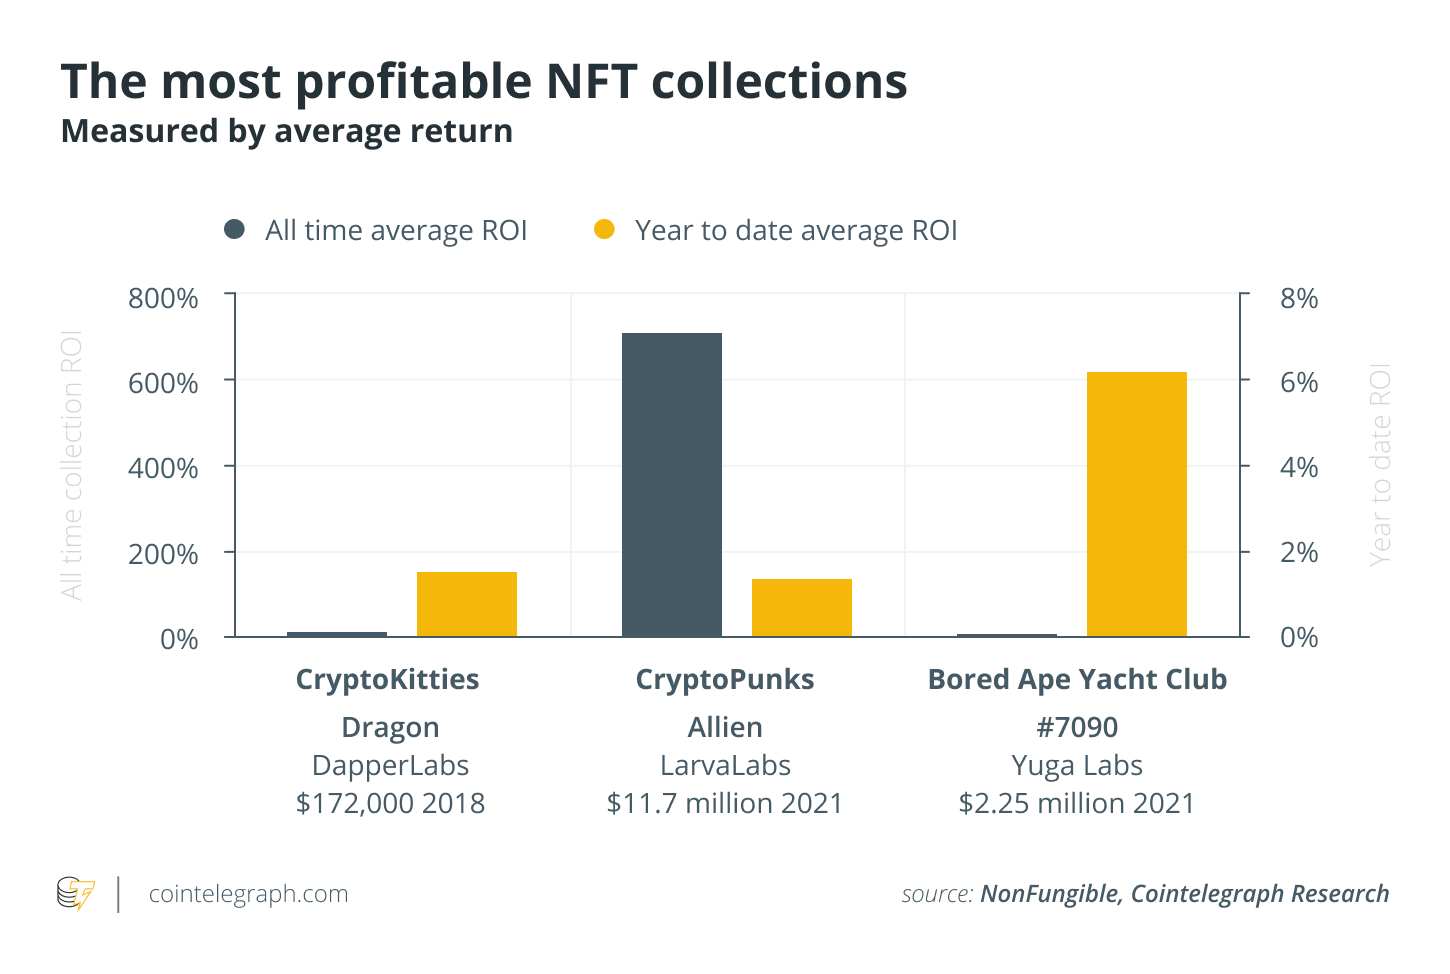 Which NFT collection has been the most profitable?